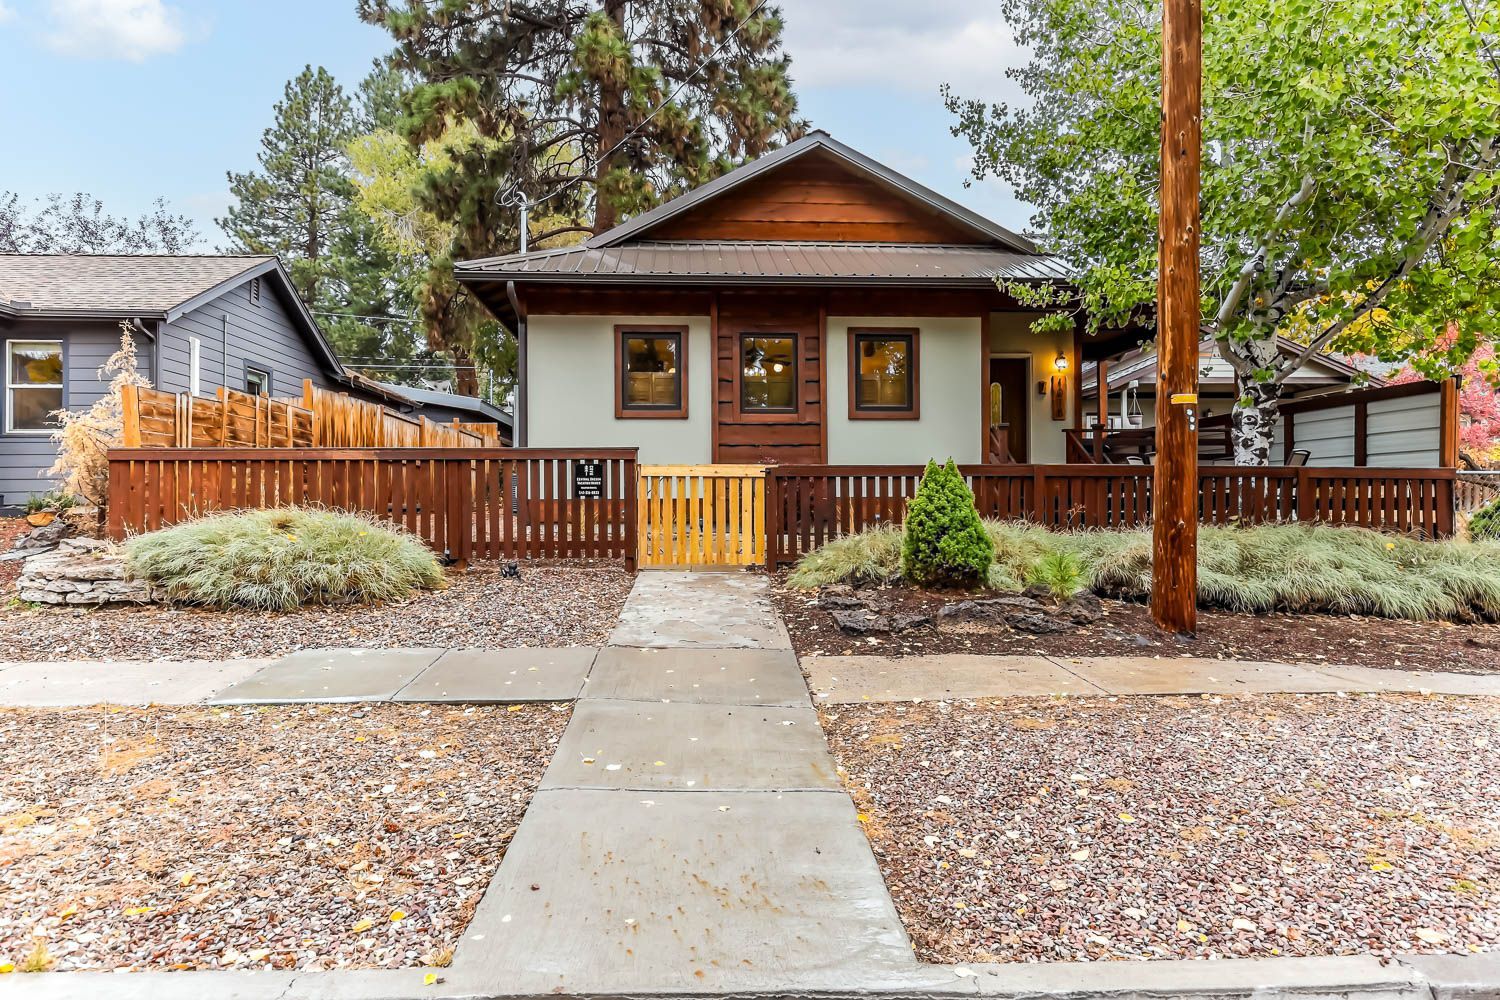 Downtown Bend Cottage walking score of 89, located directly behind Chow, Newport Market, and other Bend hot spots. 